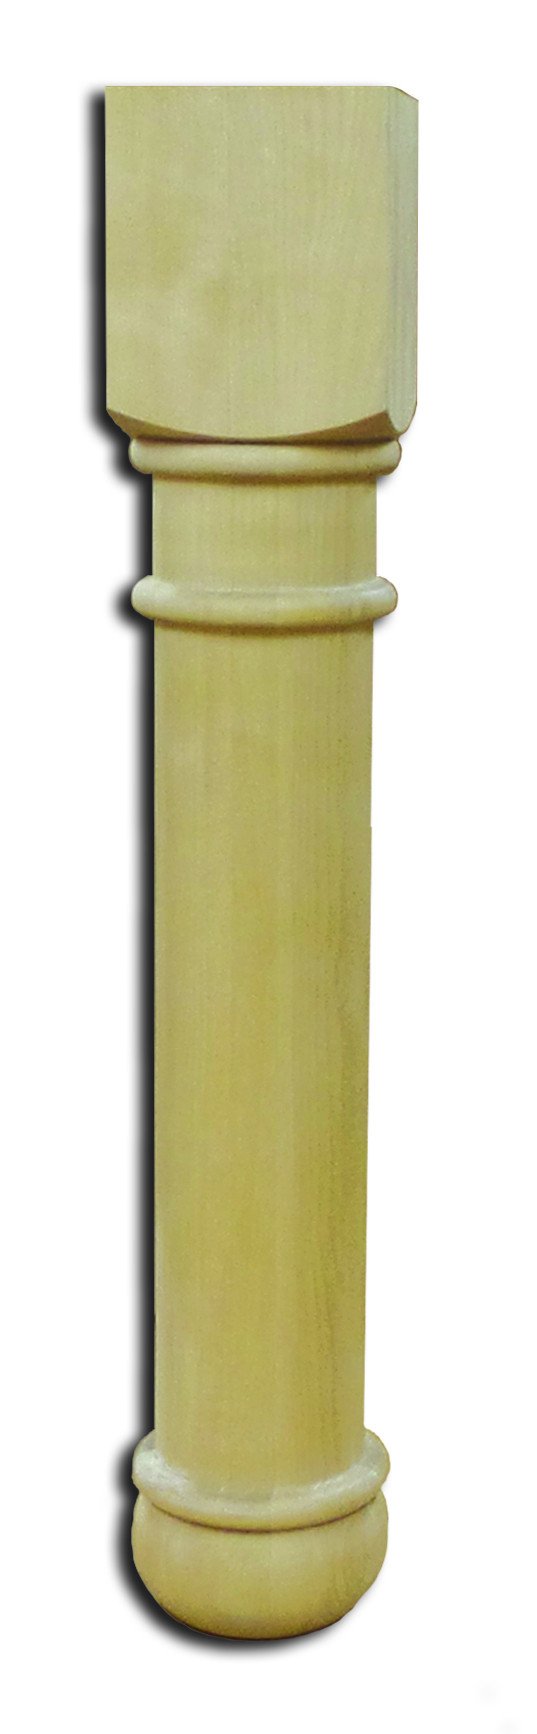 Castlewood SY-L-5057 Colonial Table Leg